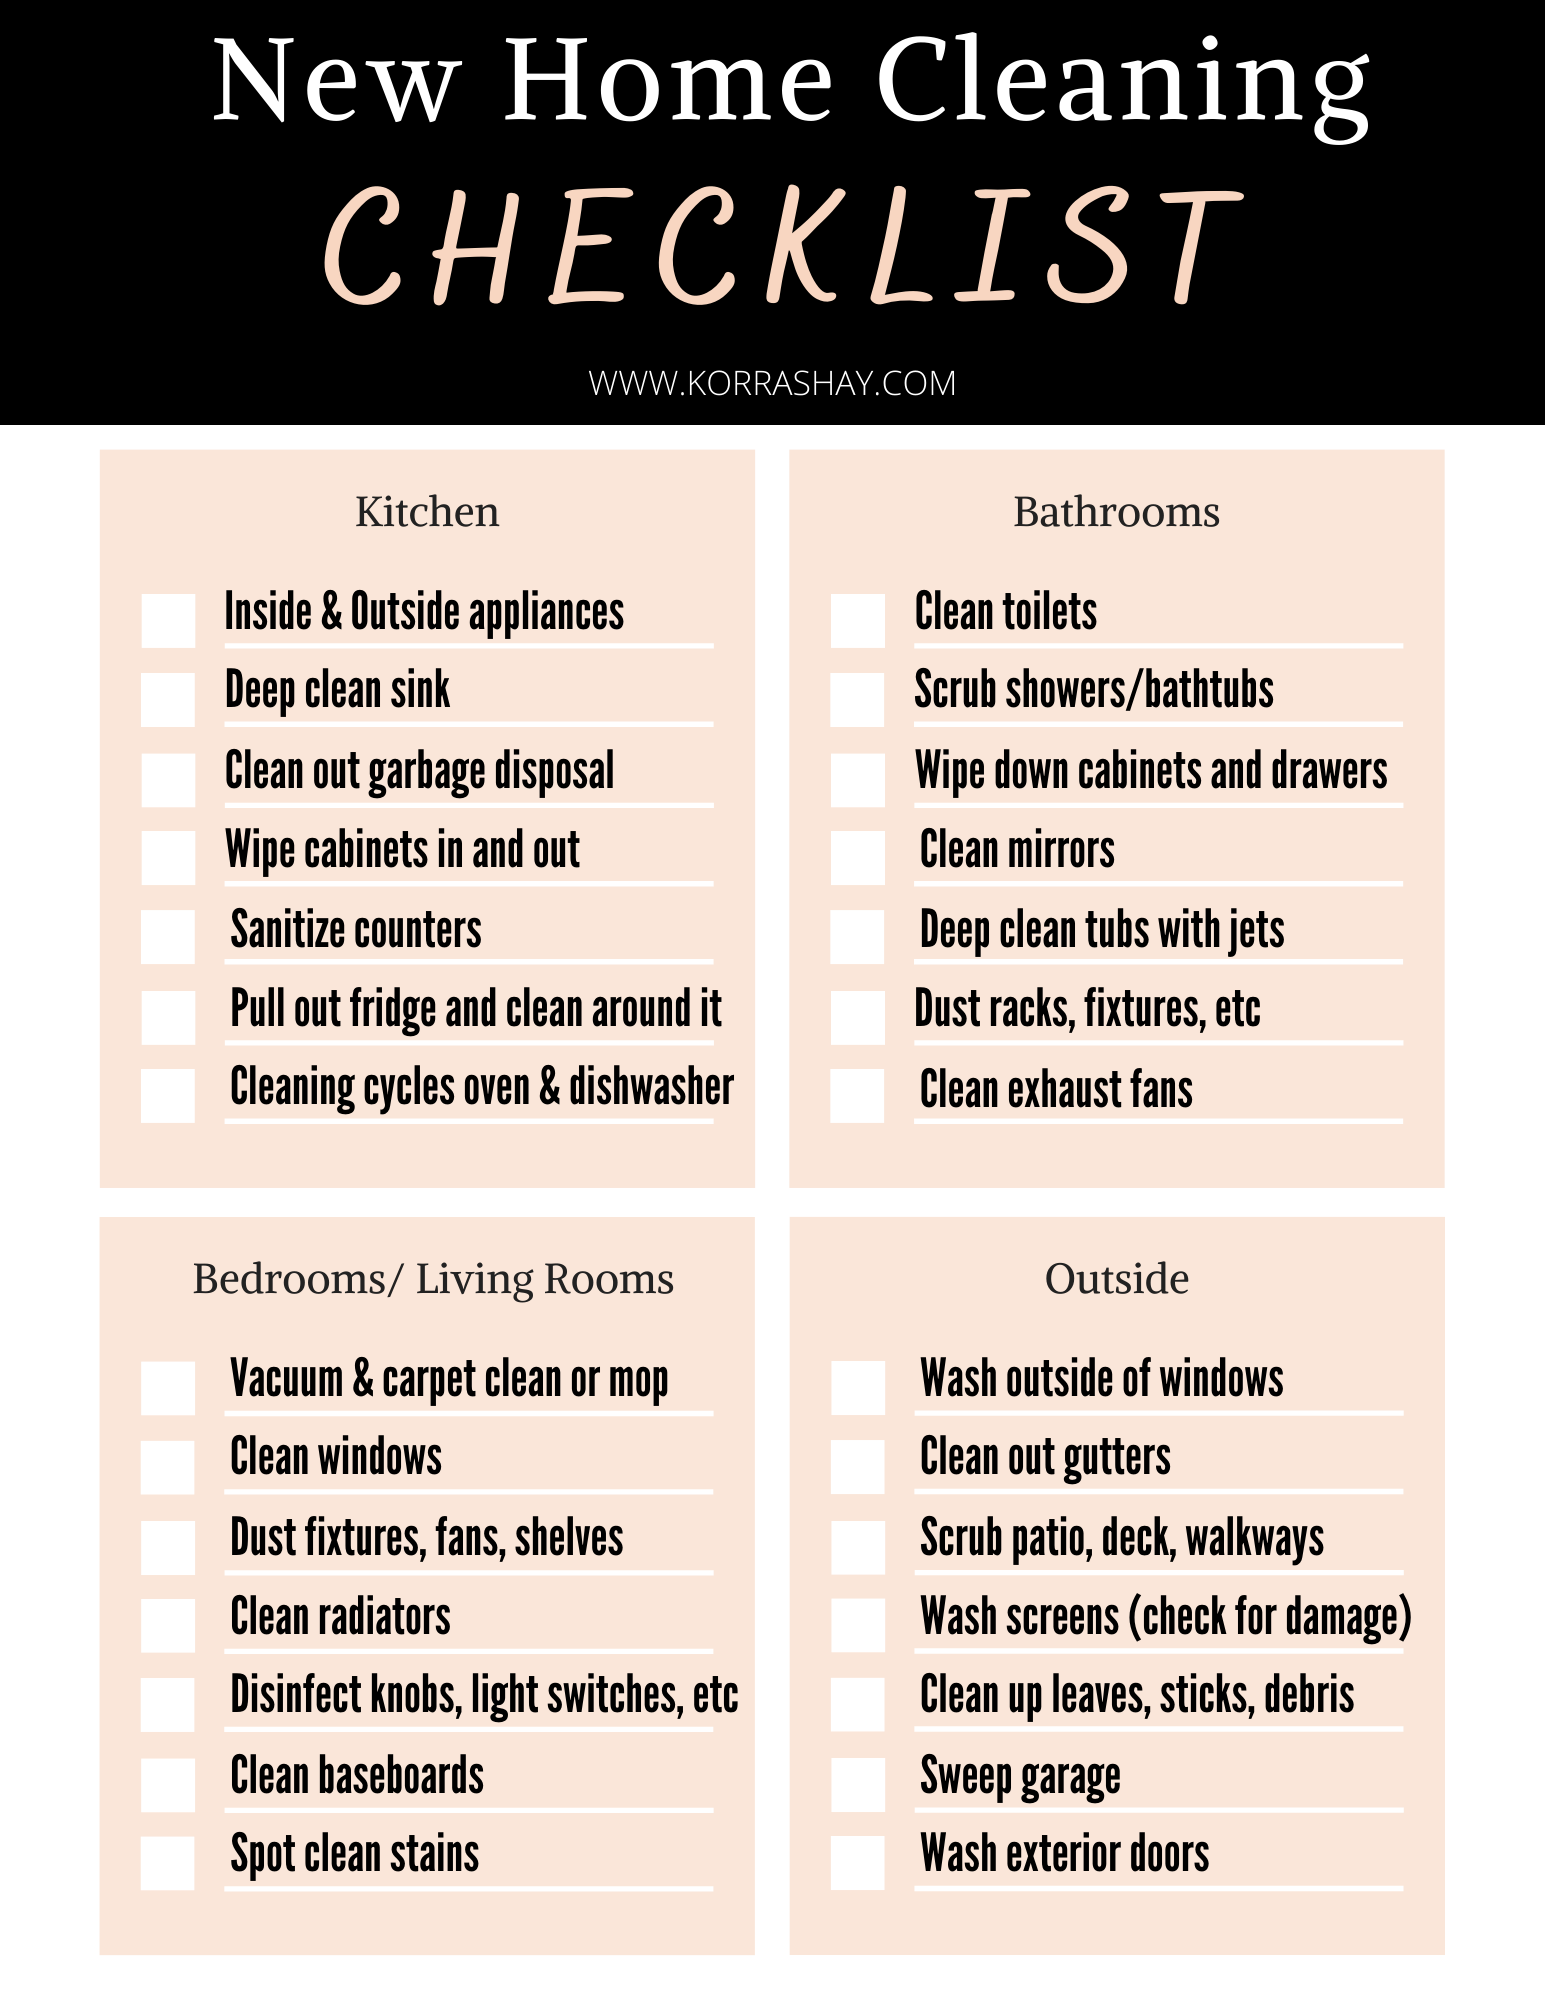 moving into a new house checklist